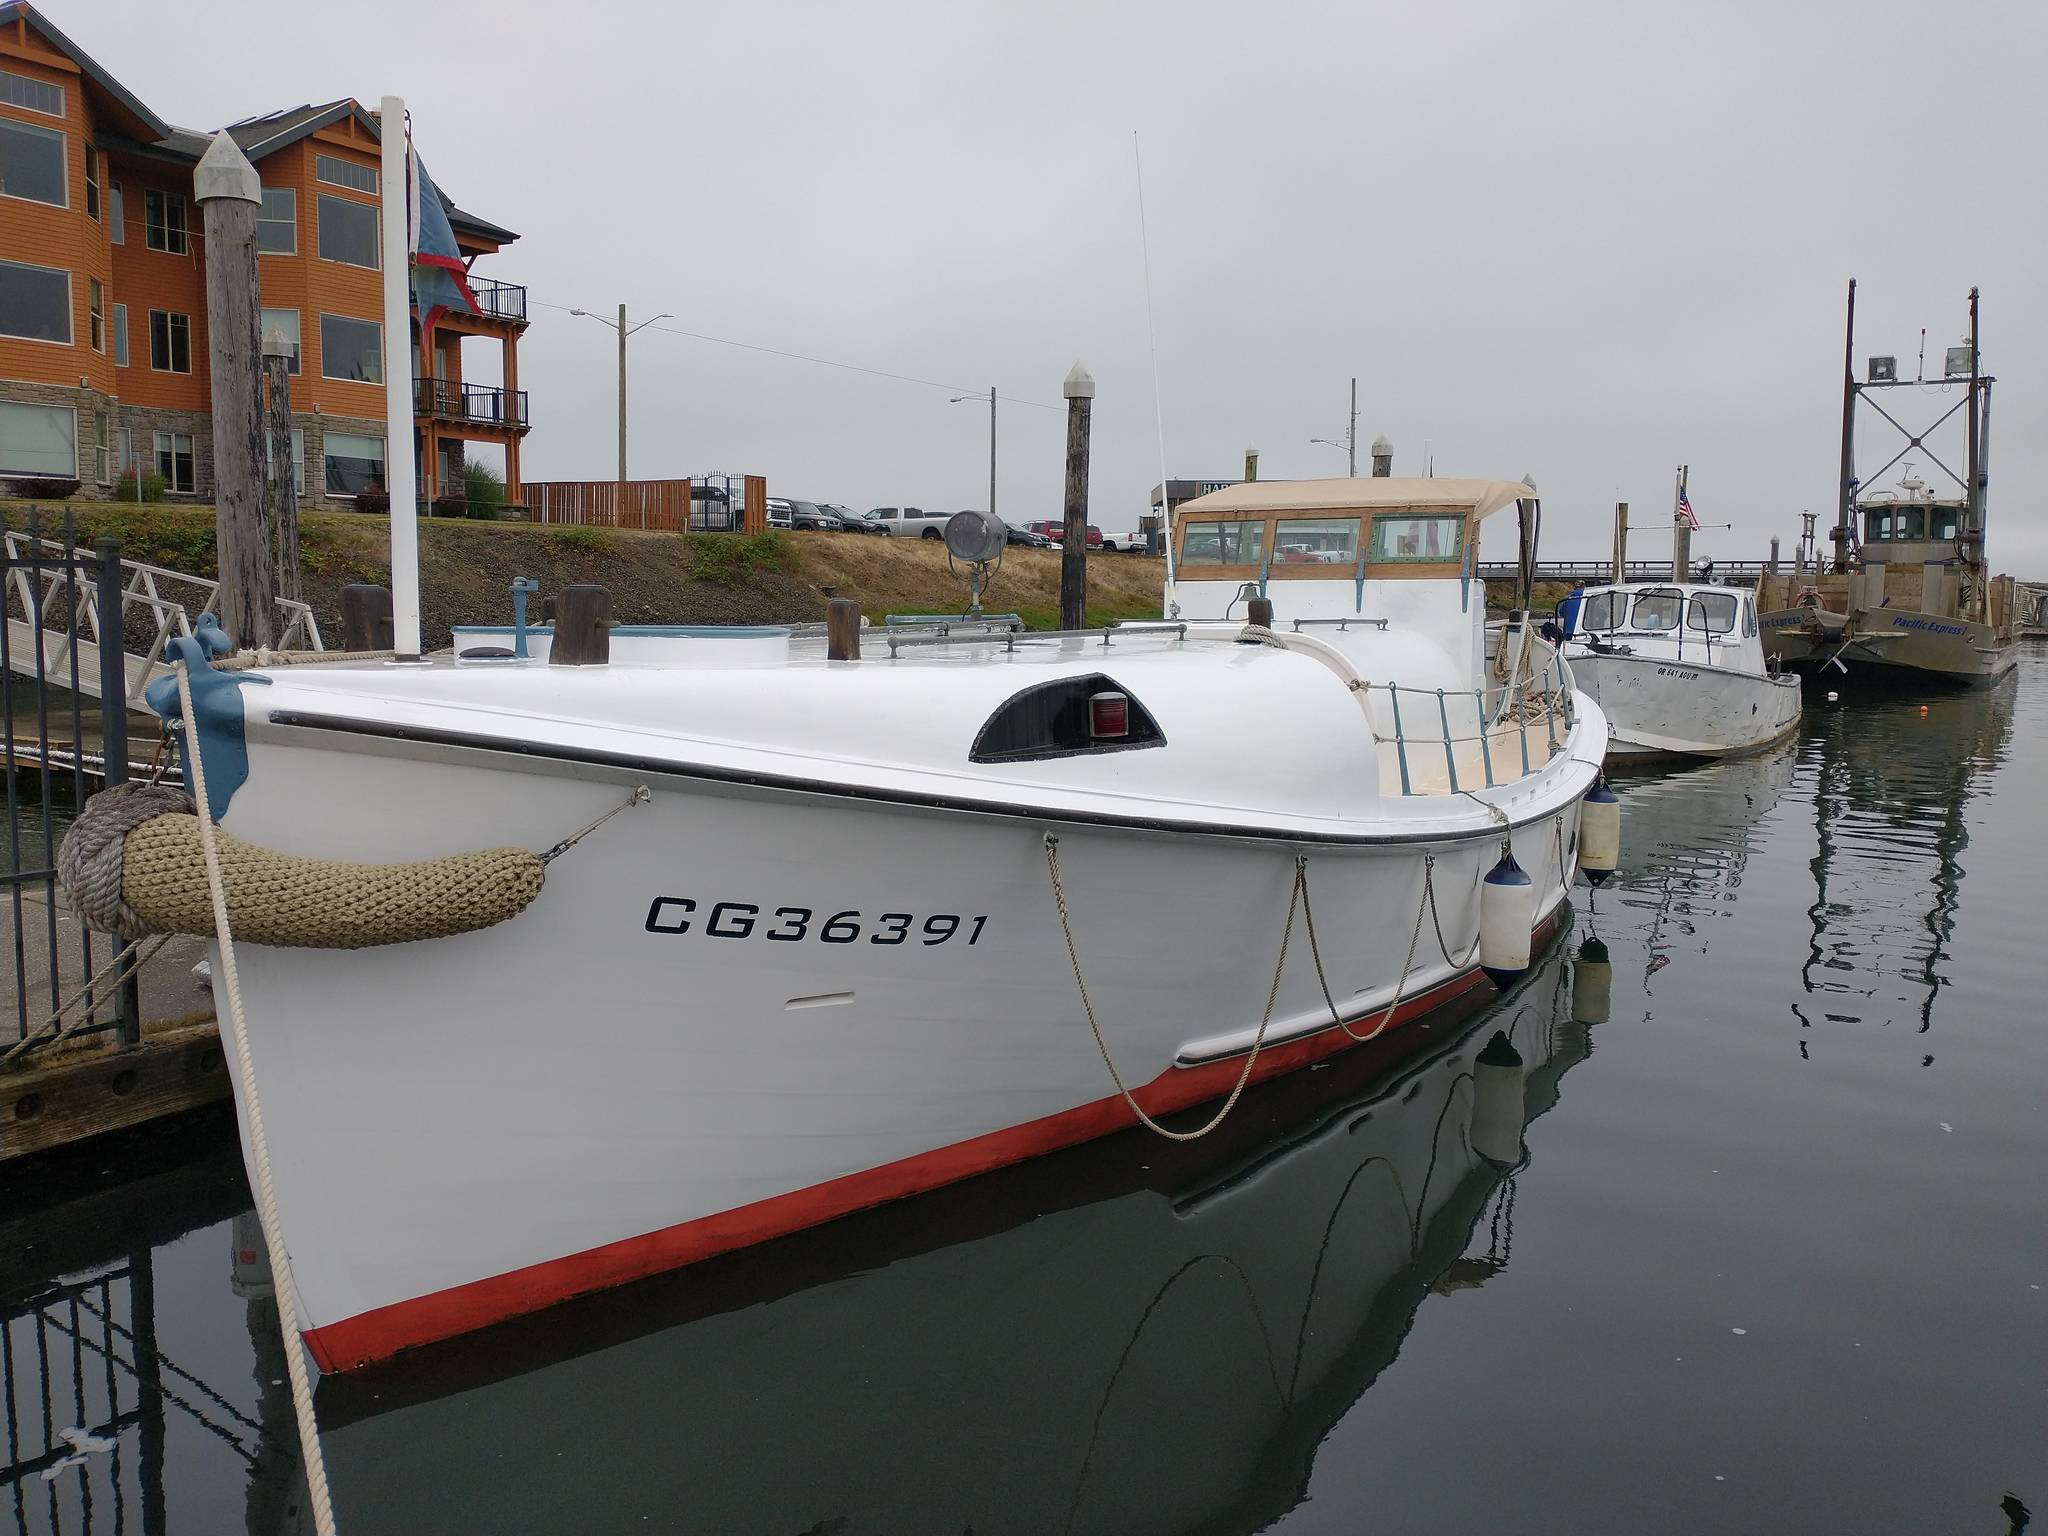 courtesy of John Shaw 
Two historic Coast Guard motor lifeboats entered the Westport Marina on Aug. 16, 2021. Both boats were donated for display to the Westport South Beach Historical Society.